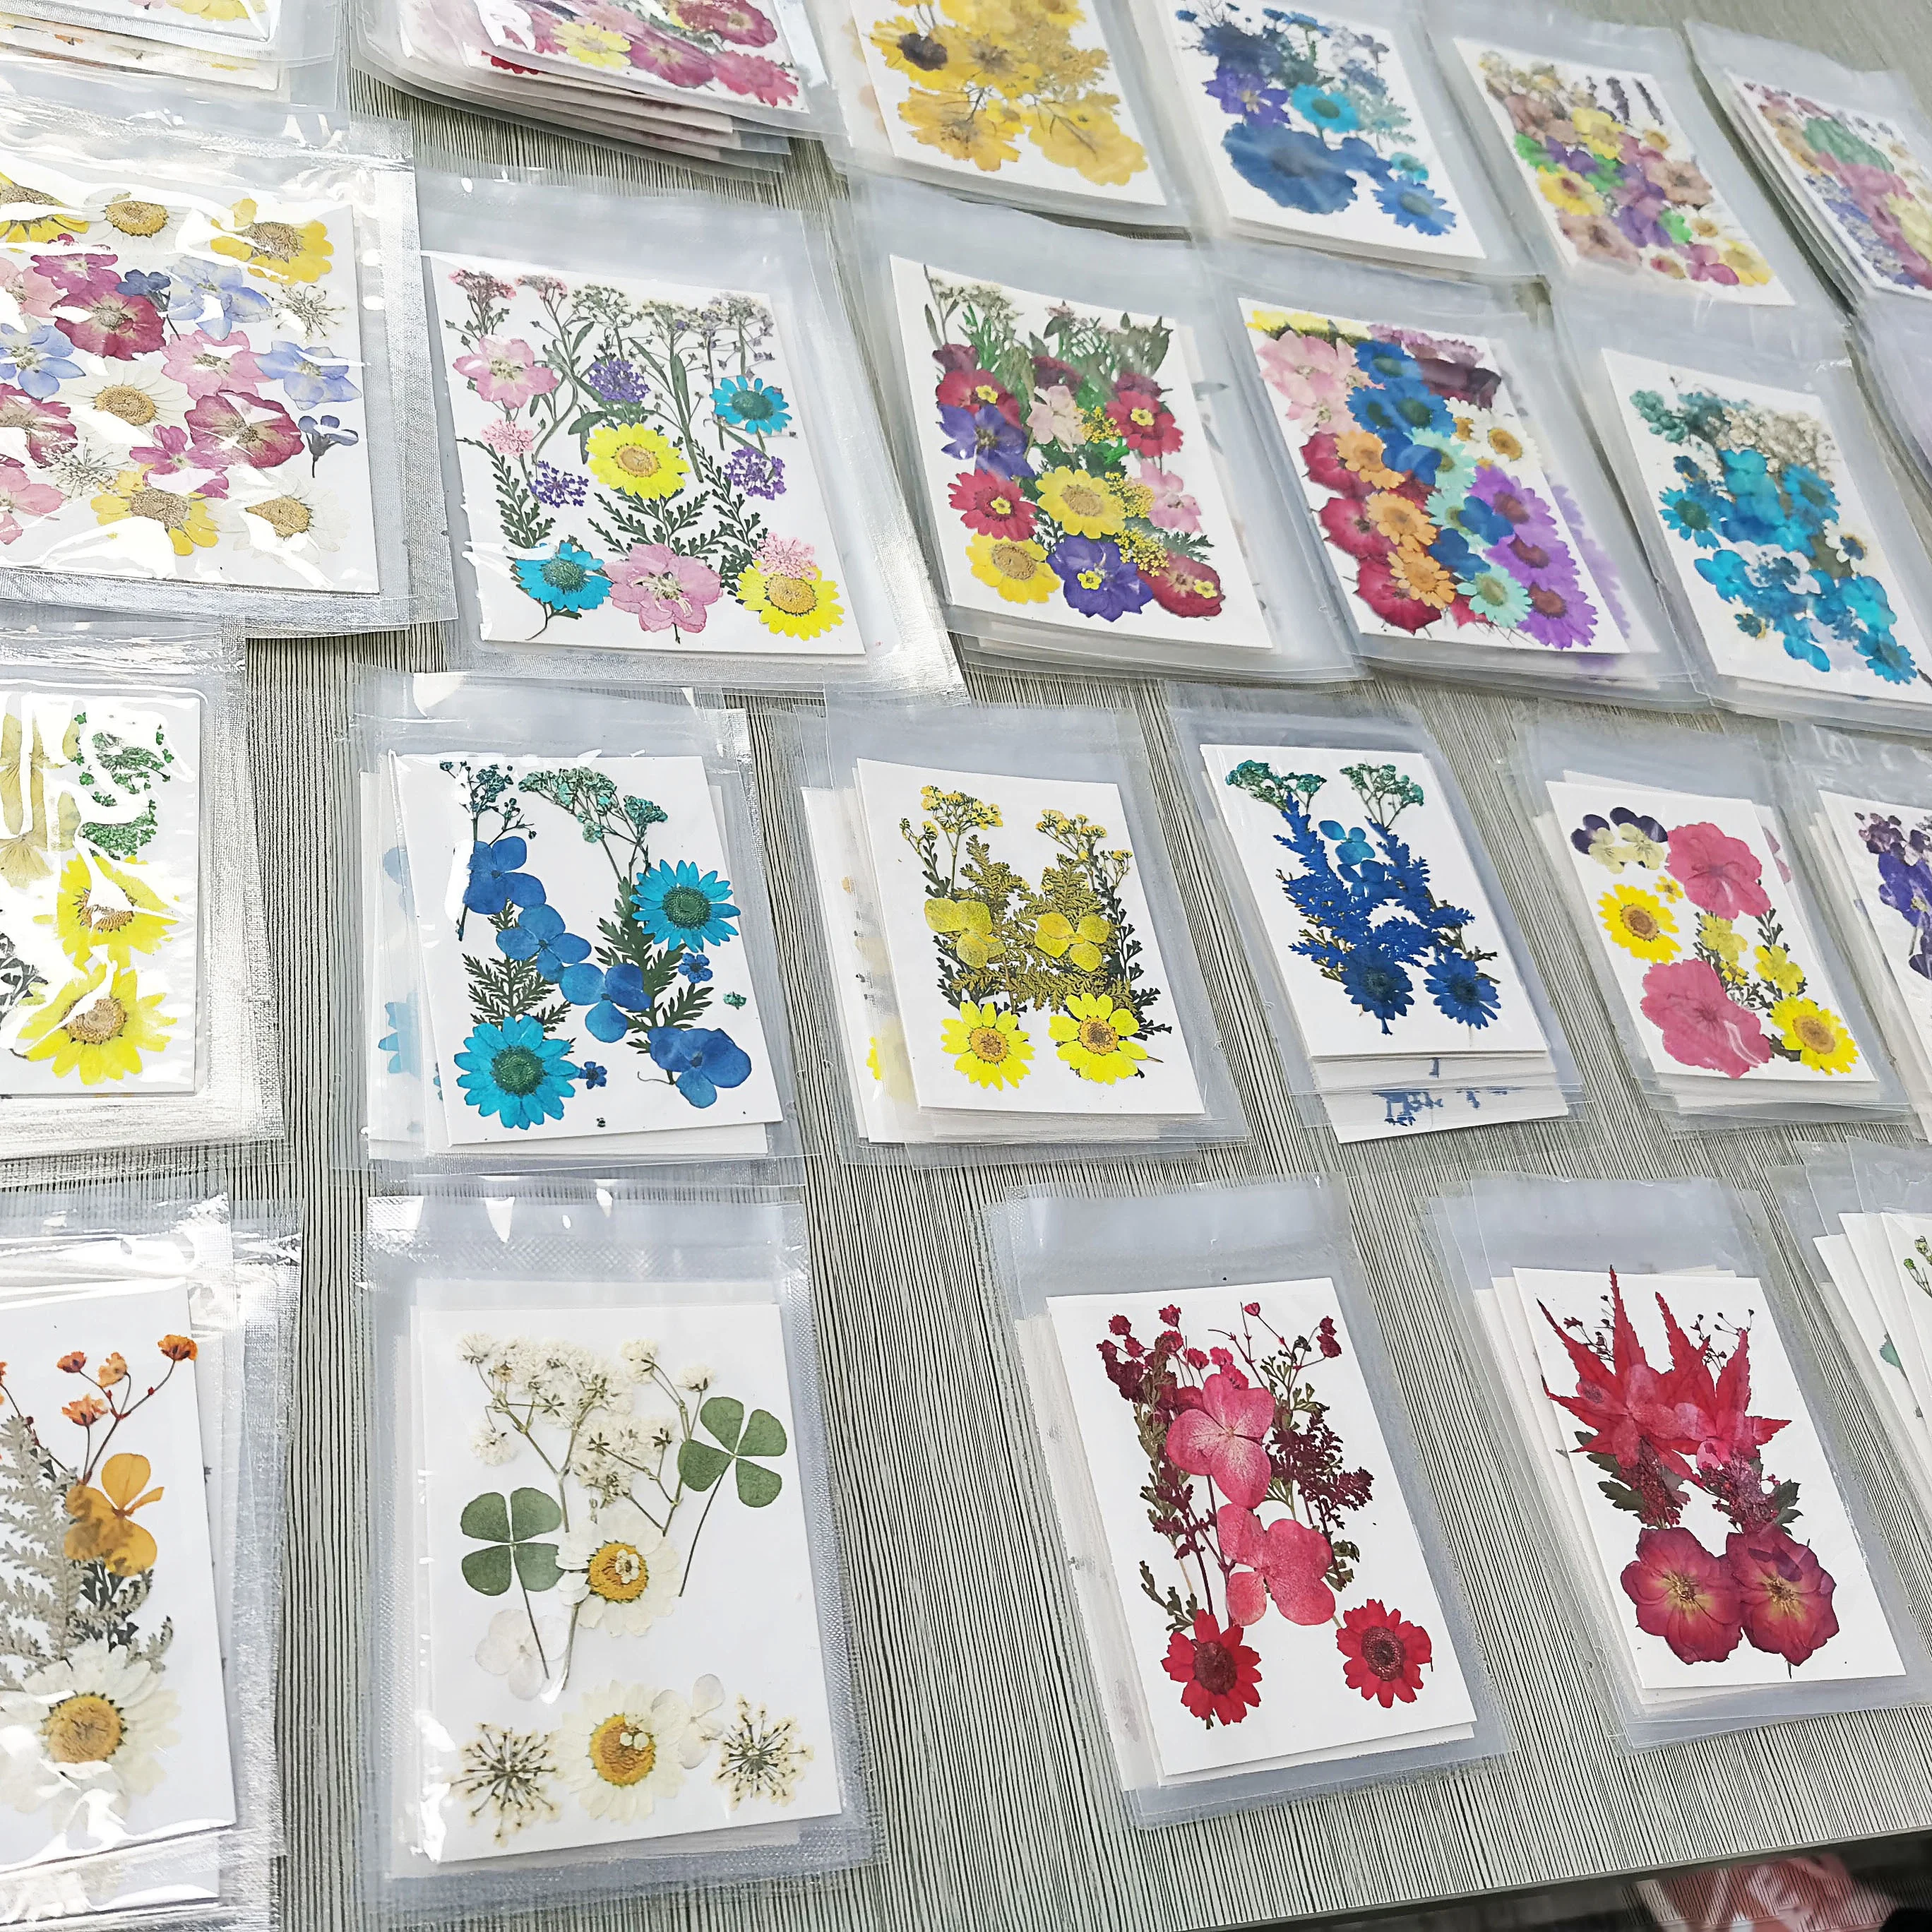 

M031 Handicraft Flower Press Bulk Mixed Pack Fresh Real Pressed Natural dried Flowers dried Pressed Flower for resin